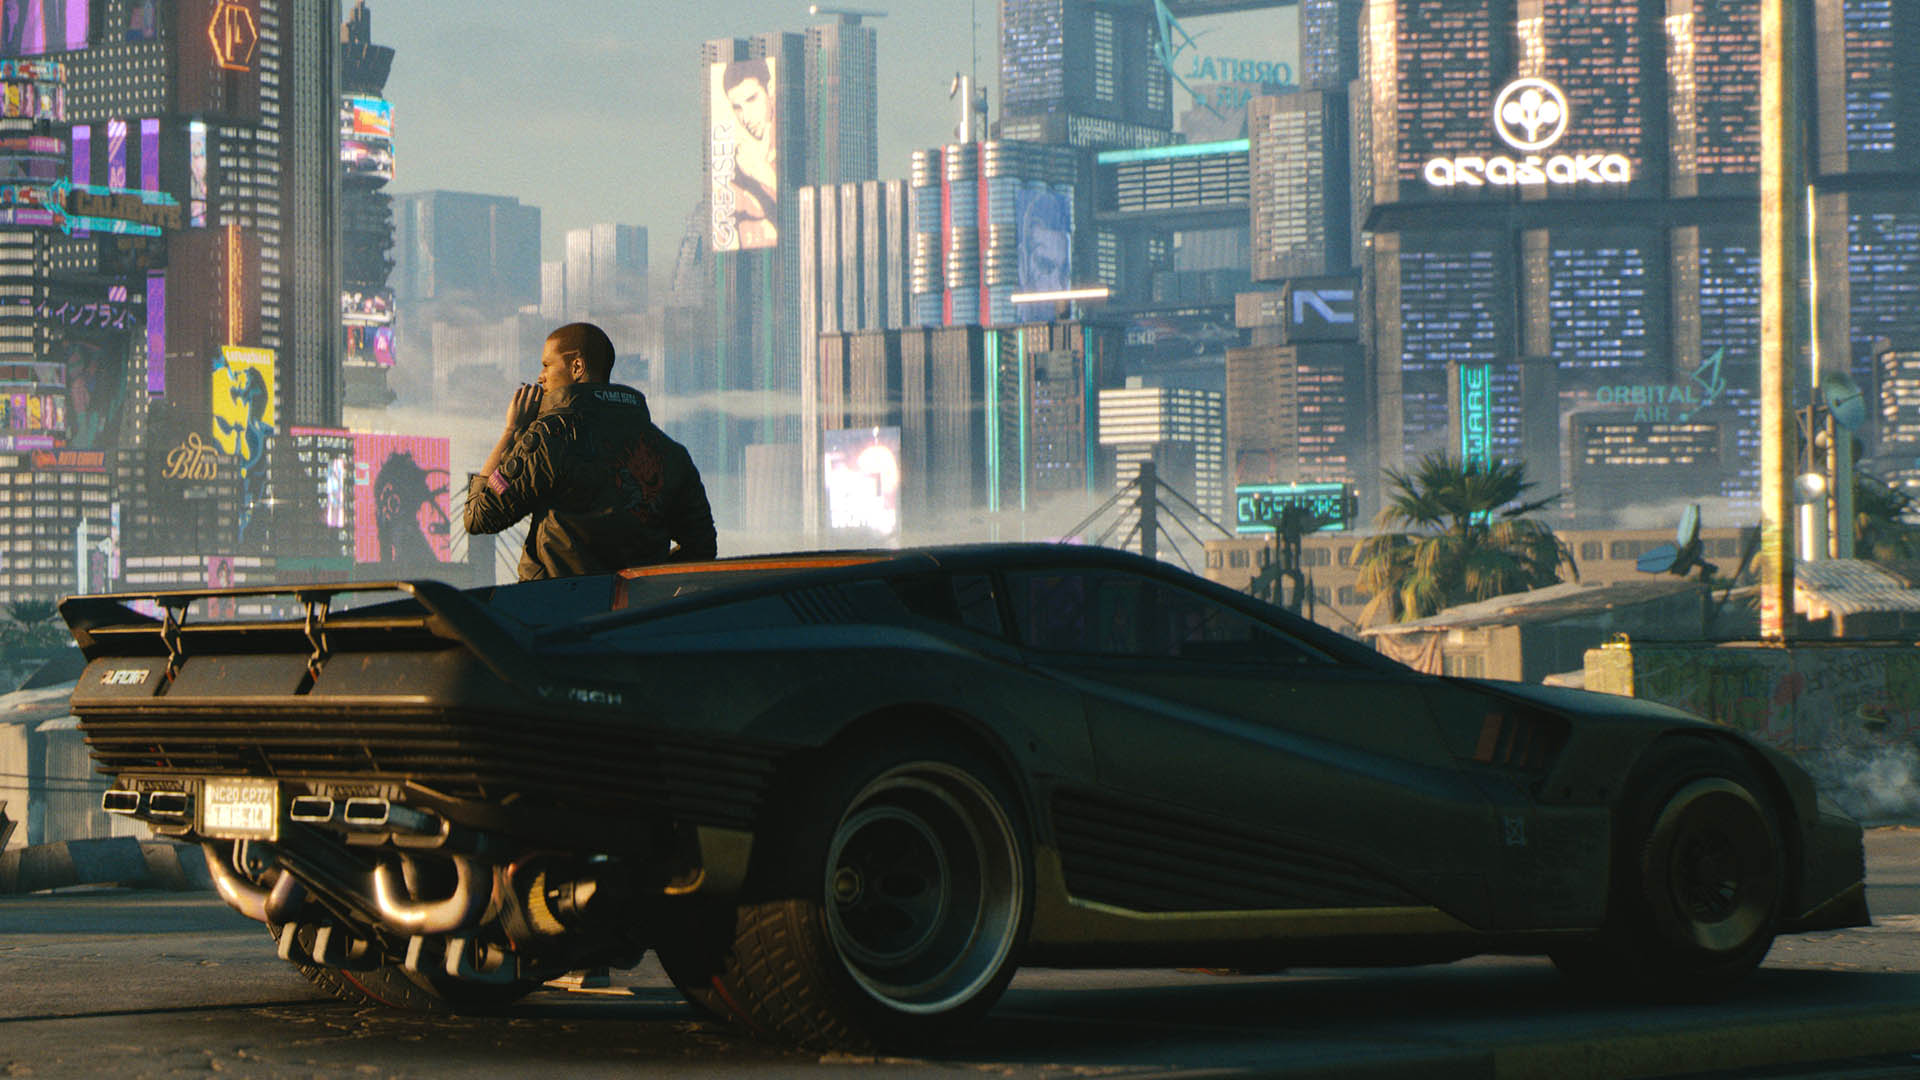 Cyberpunk 2077 Review - An Irresistible World to Explore 14